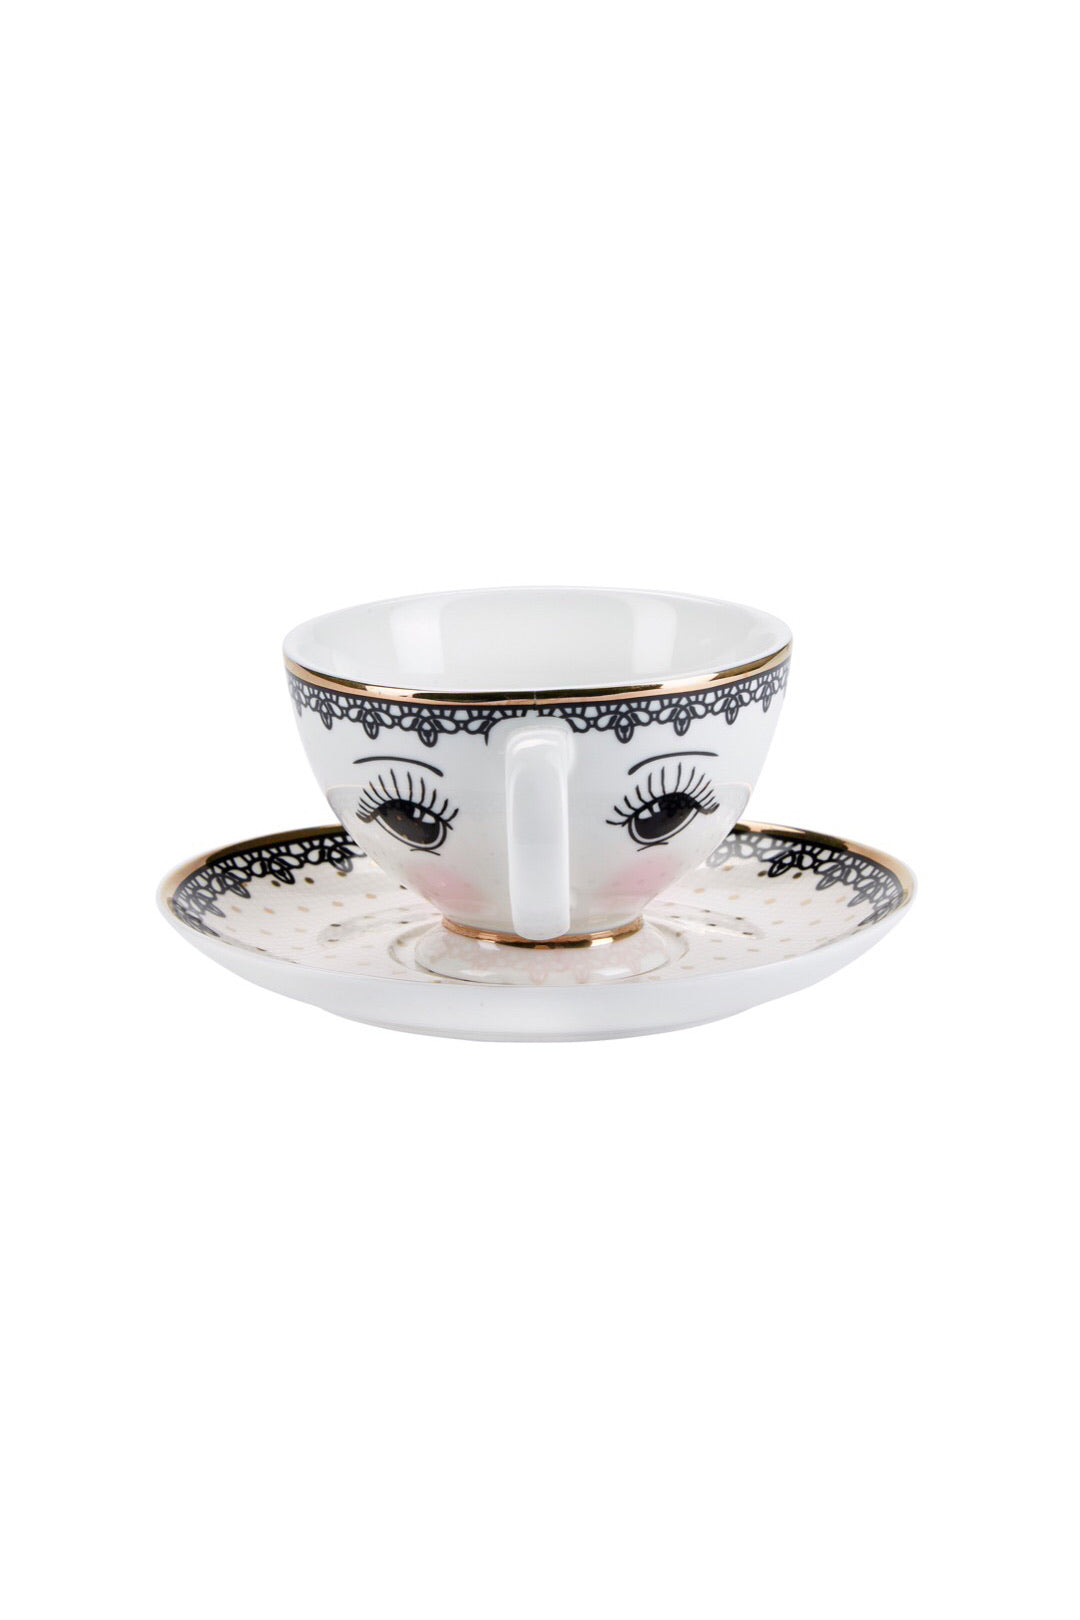 Pretty Open Eyes And Lace Tea Set